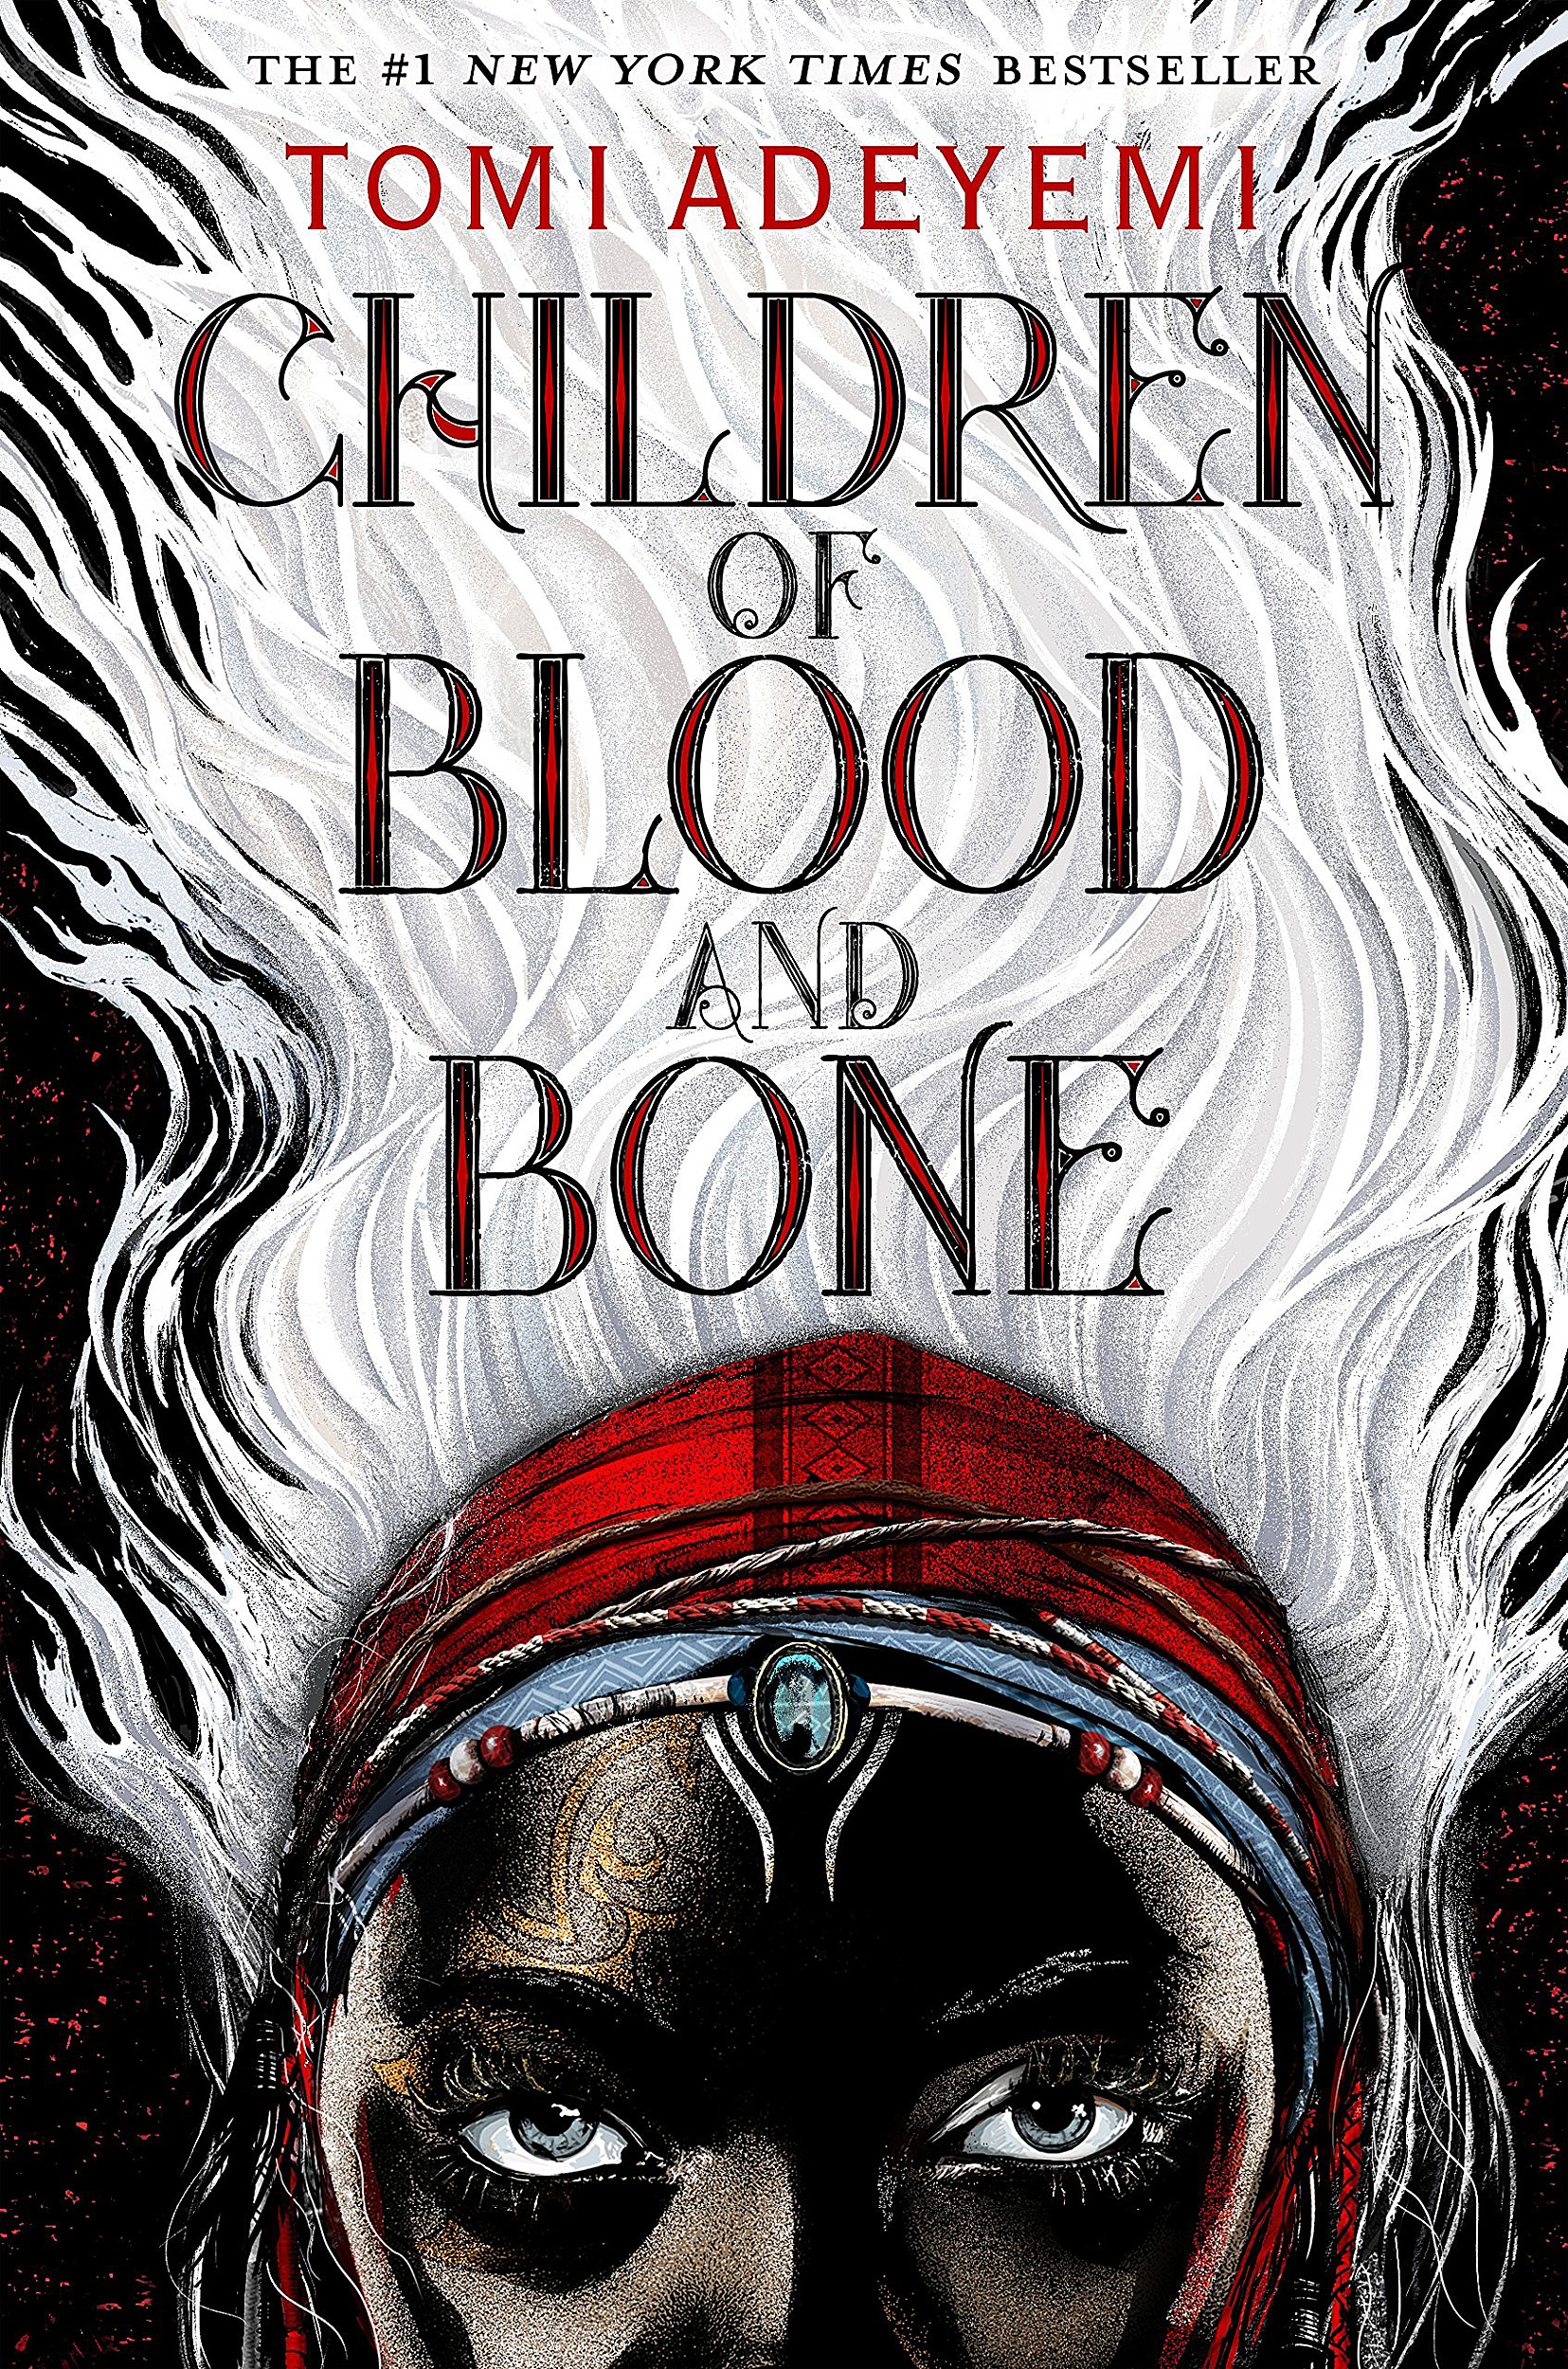 Cover of “Children of Blood and Bone” by Tomi Adeyemi.